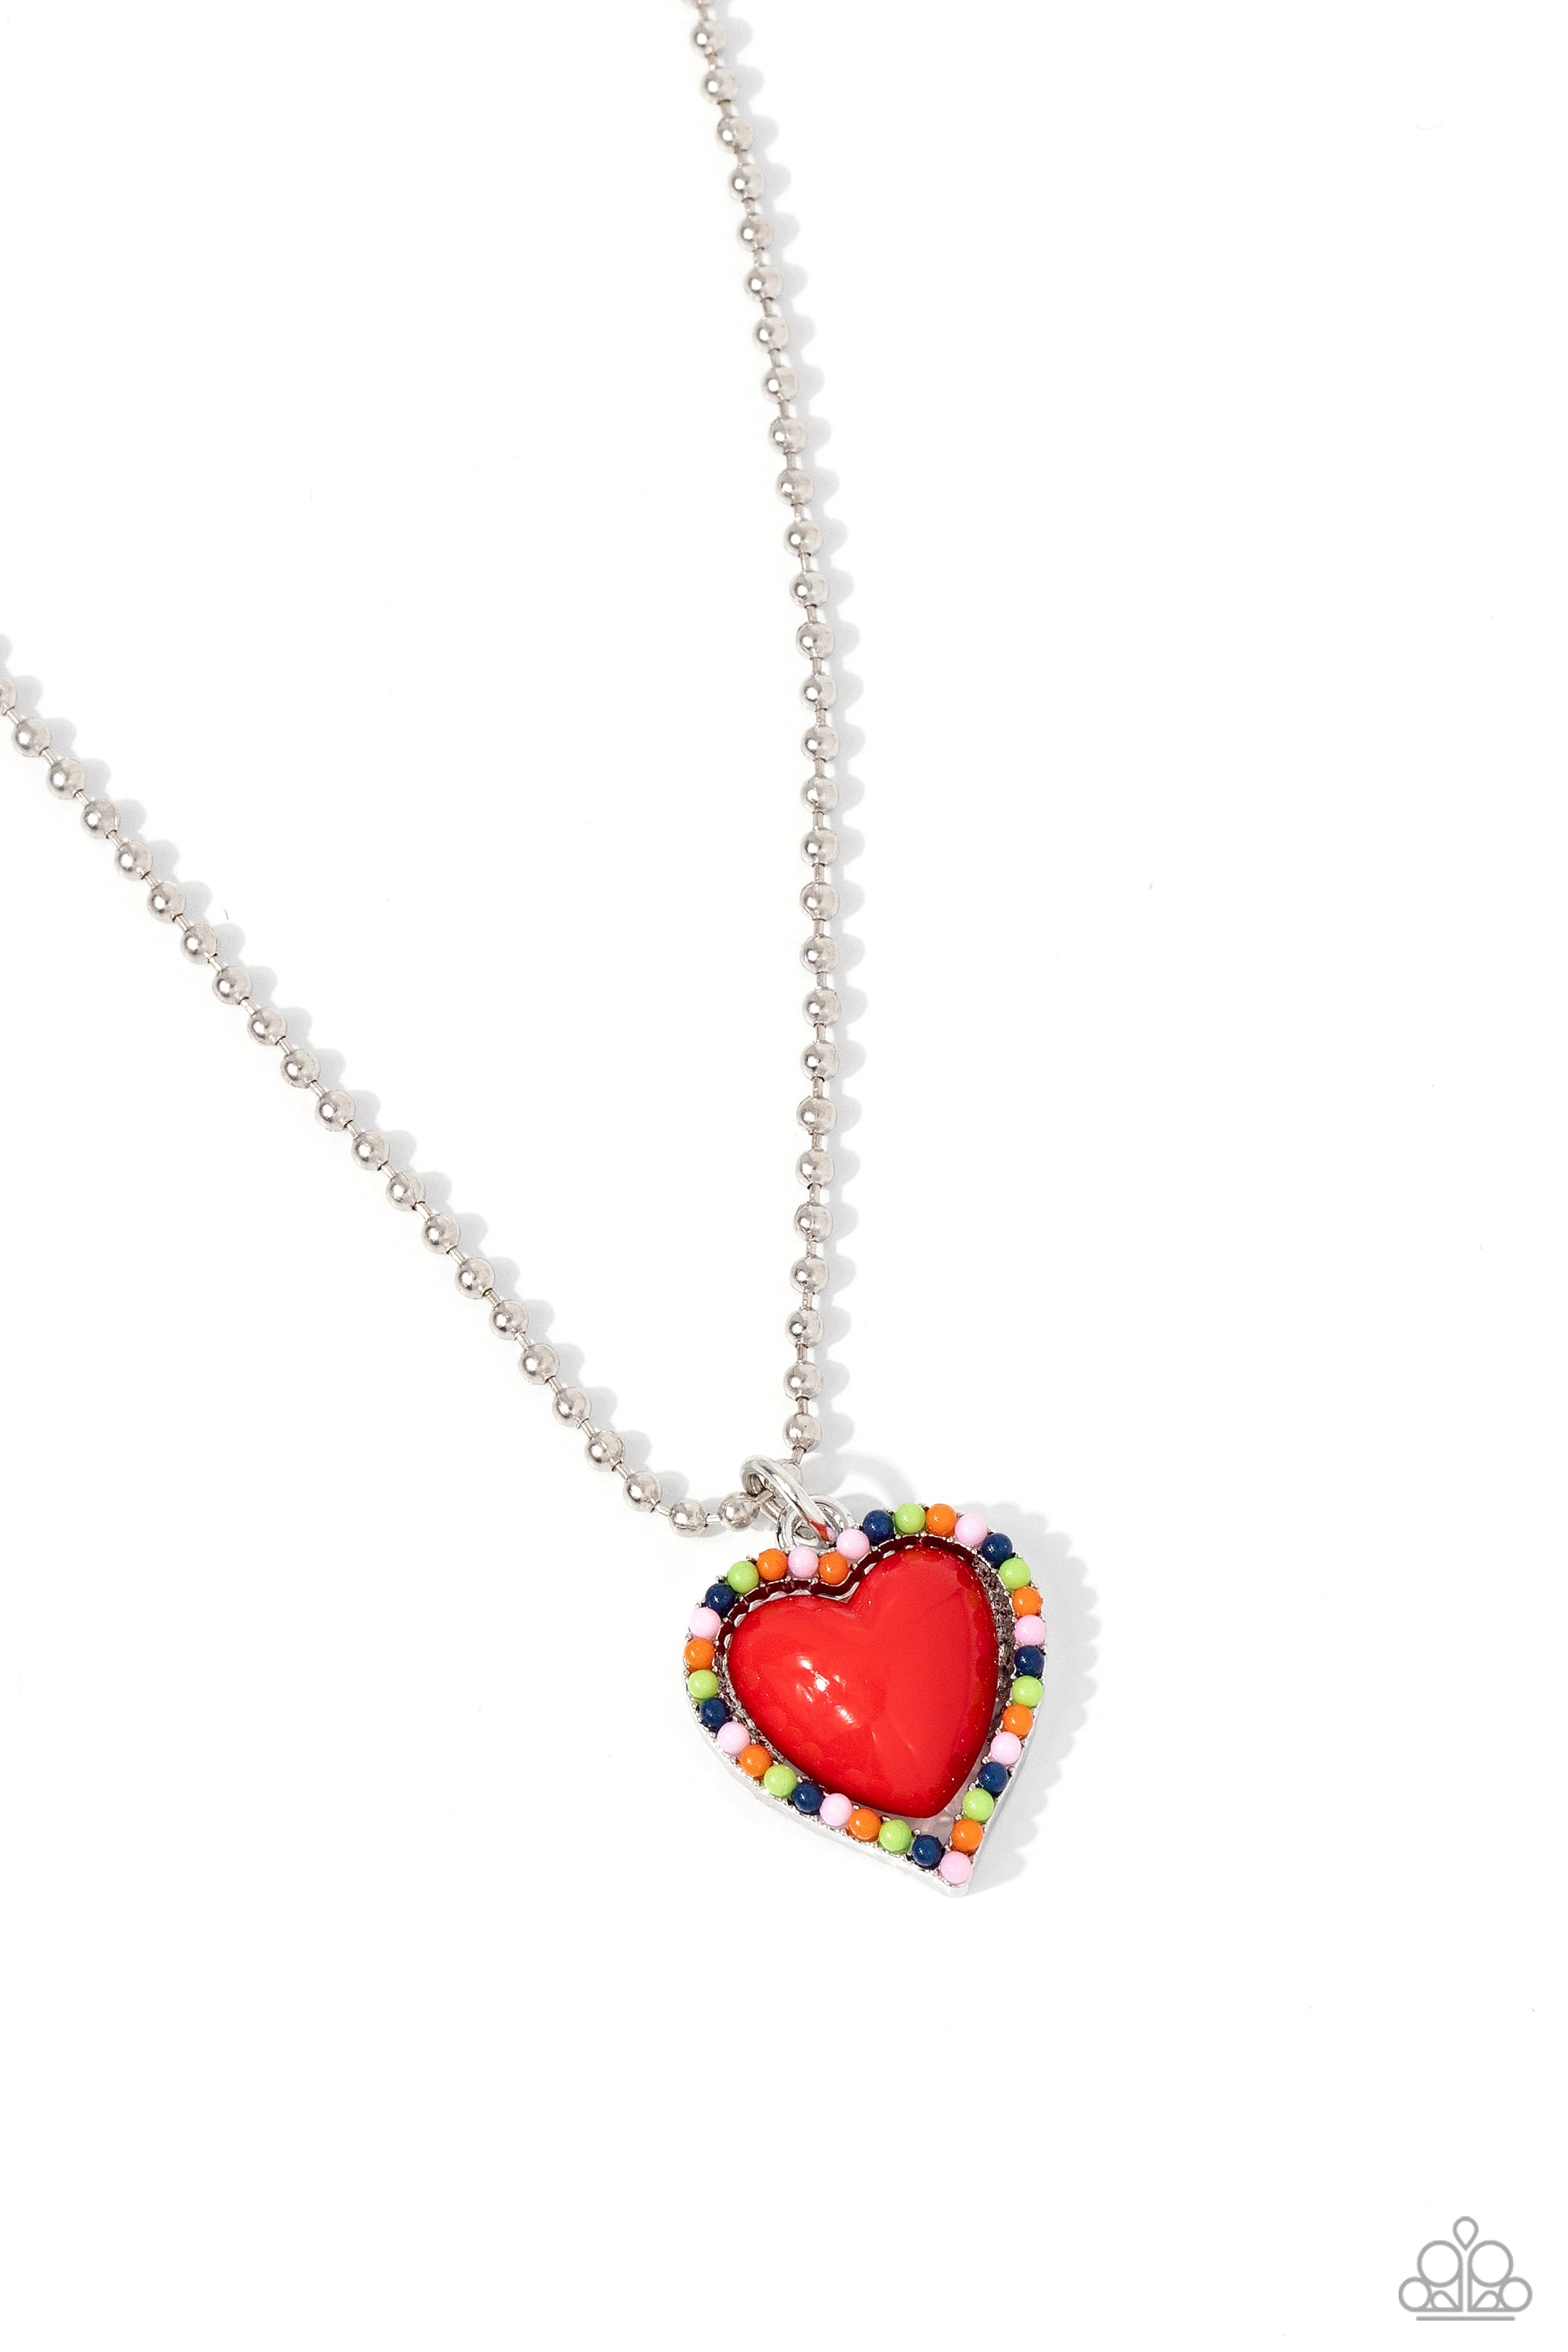 ROMANTIC RAGTIME RED-NECKLACE